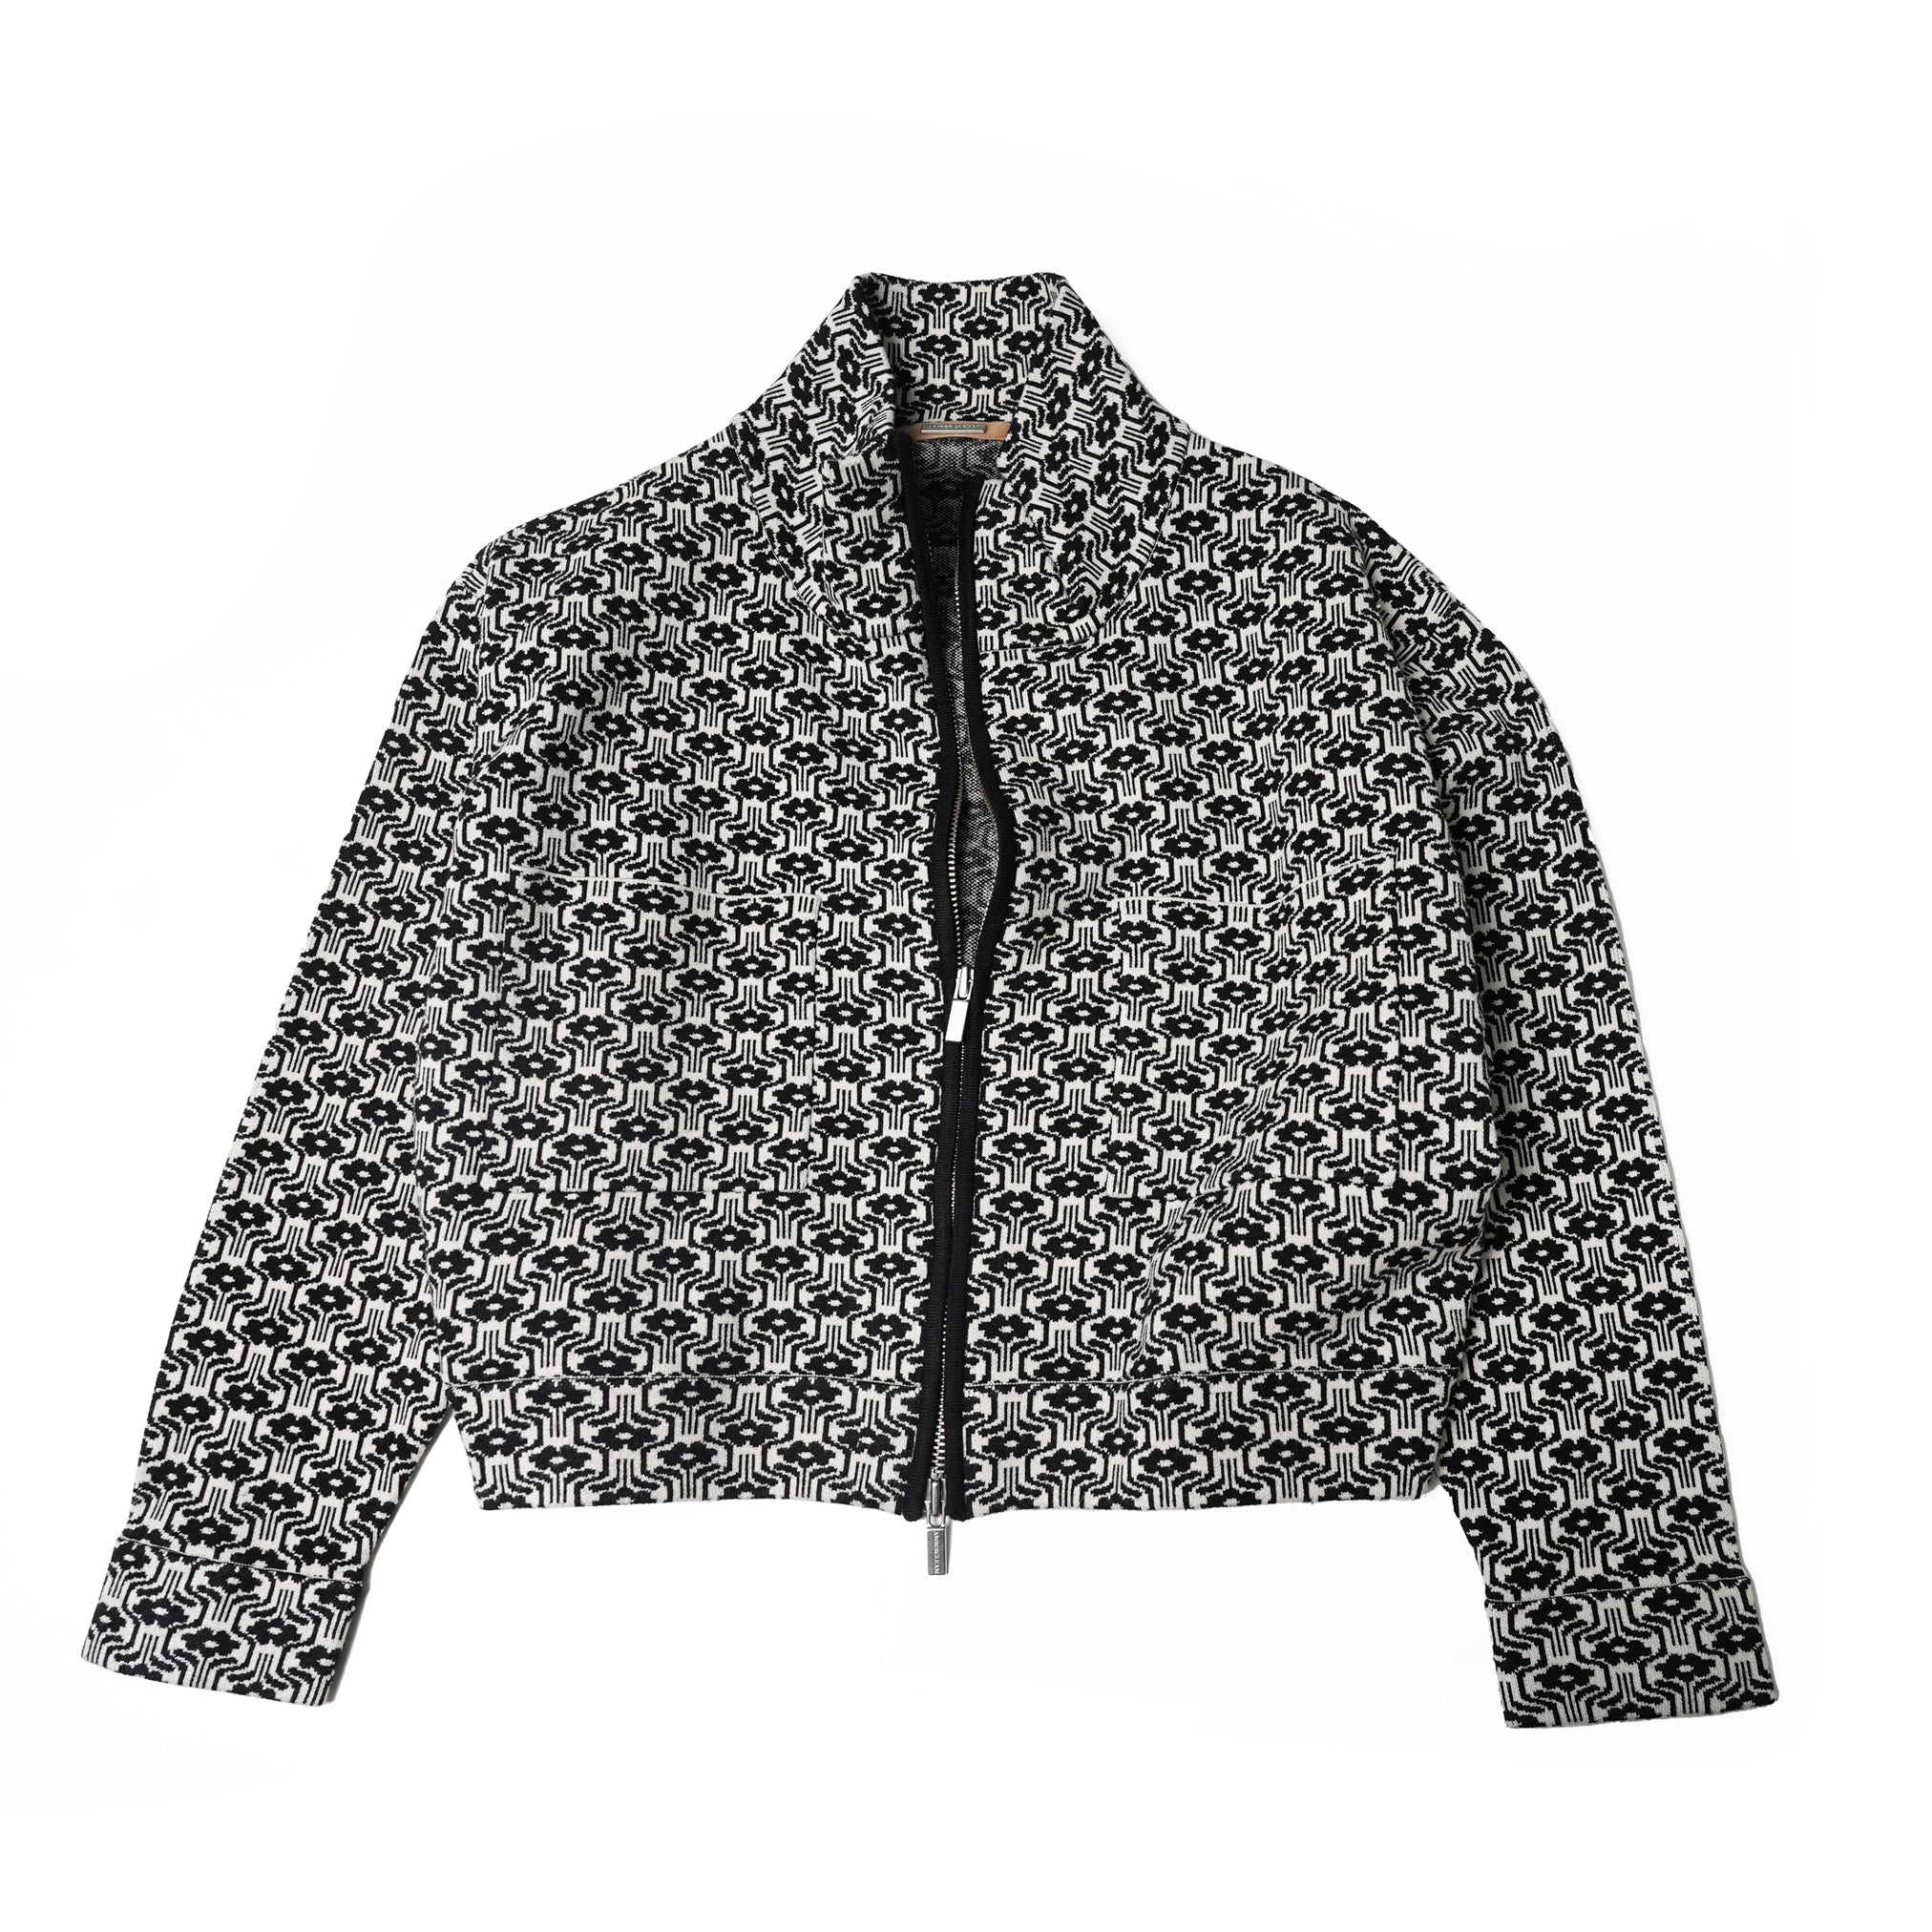 Name:Jacquard Knit Drivers Jacket | Color:Geometry | Size:Short【AMBERGLEAM_アンバーグリーム】| No:1145131114